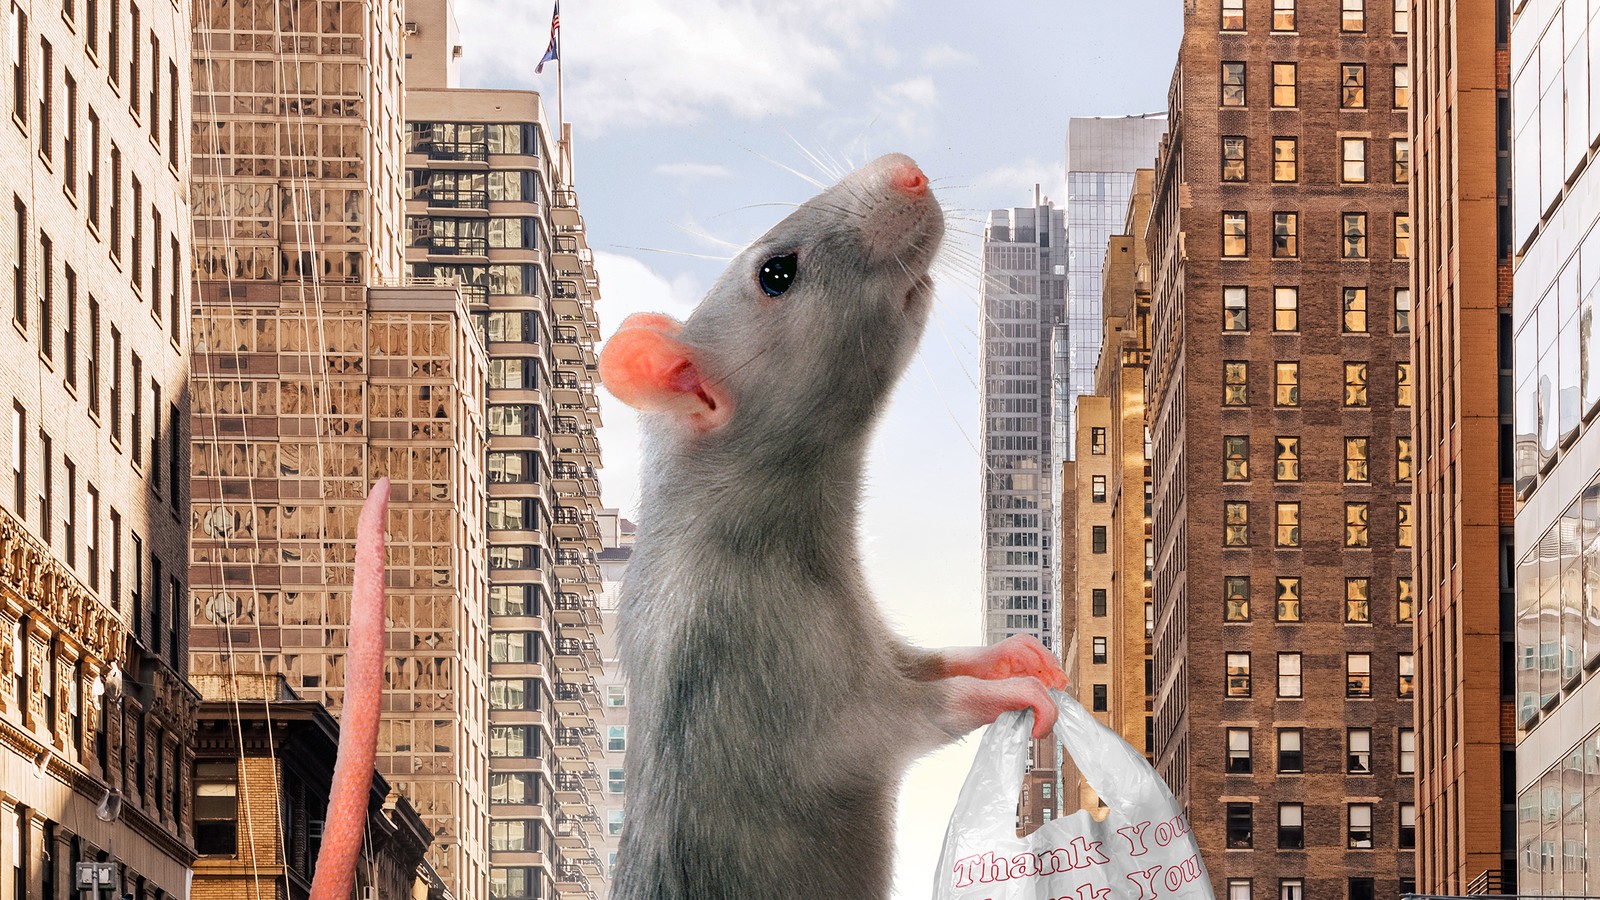 I live one an urban rat-infested block. Thoughts about using